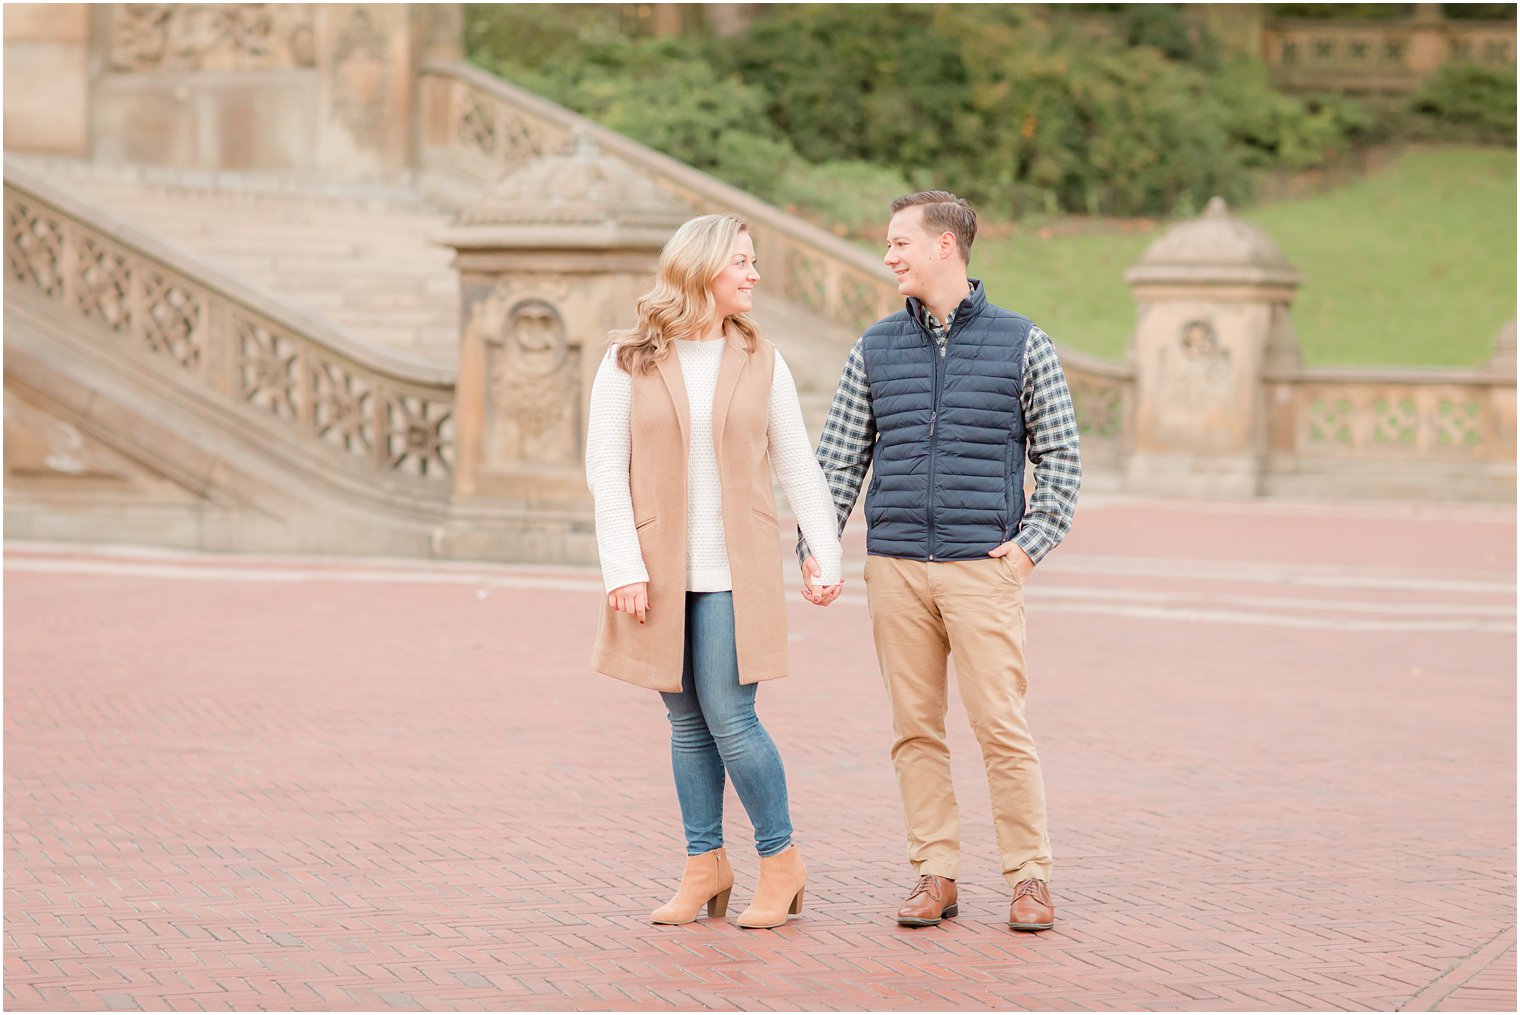 Autumn fall engagement at Bethesda Terrace in Central Park